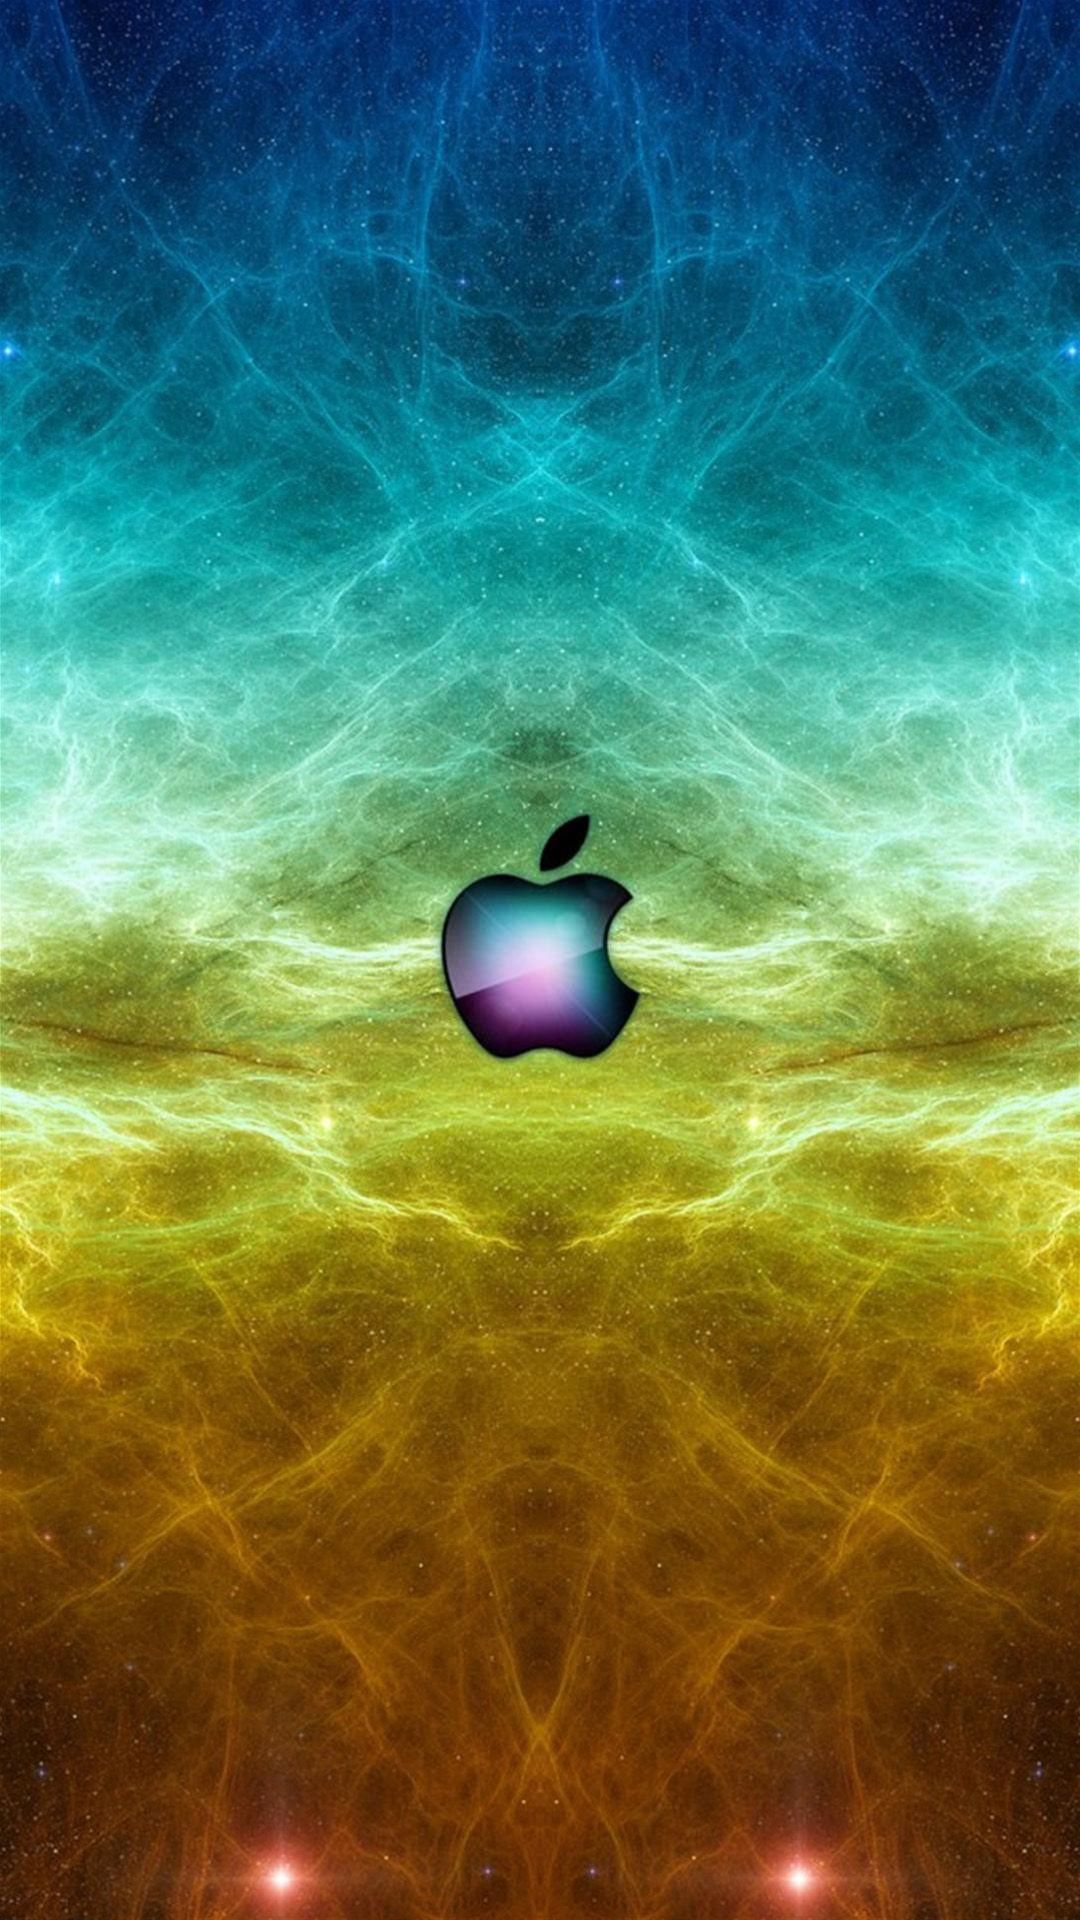 Galaxy Green iPhone Wallpapers on WallpaperDog